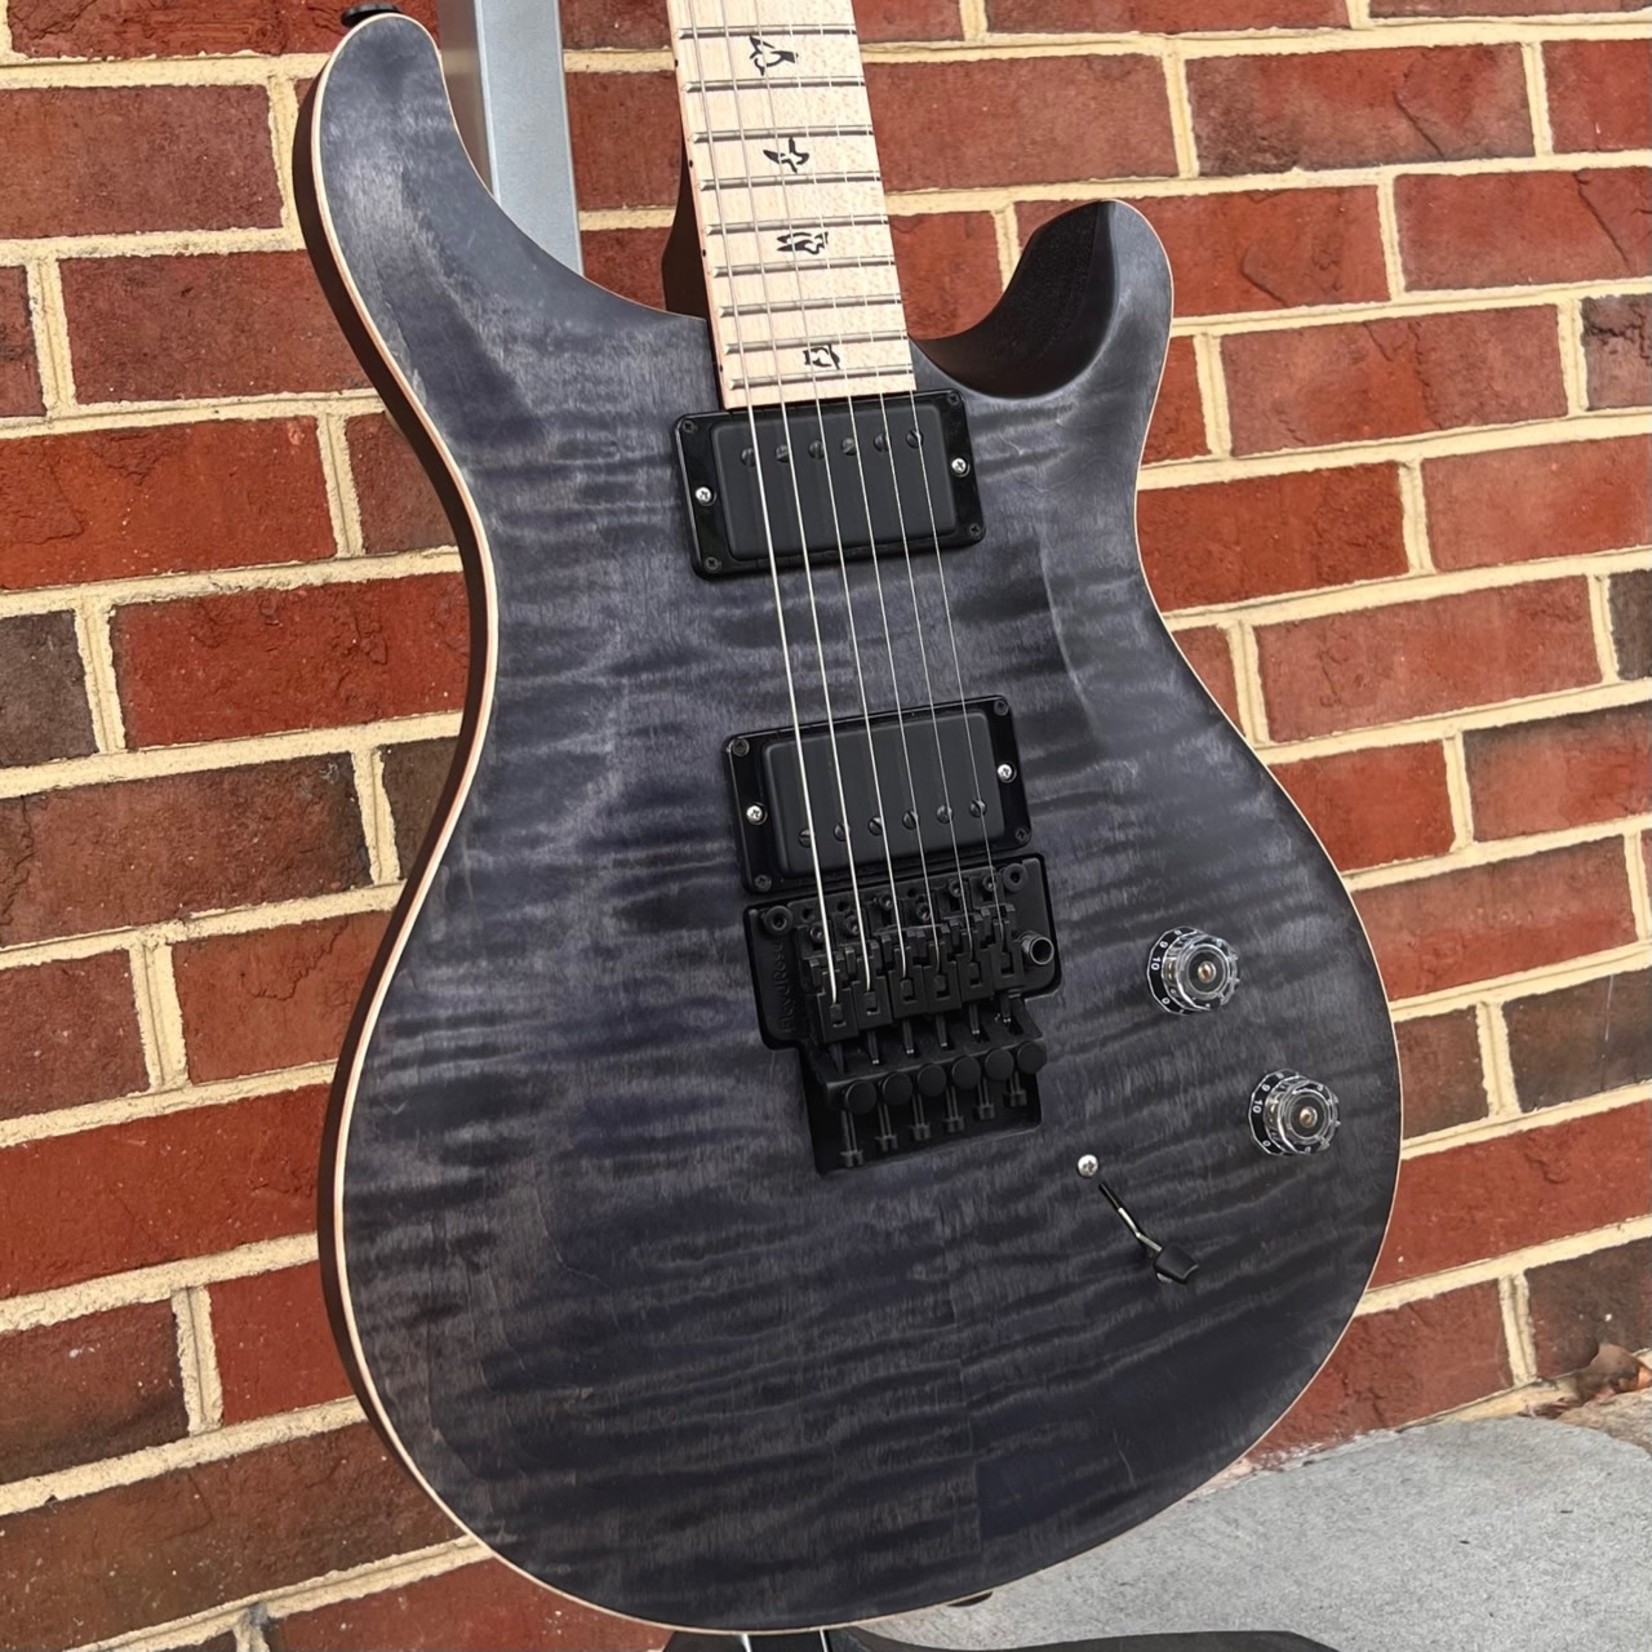 Paul Reed Smith Paul Reed Smith DW CE24 "Floyd" Dustie Waring Signature Model, 2018 Limited Edition, Grey Black, Gig Bag (USED)